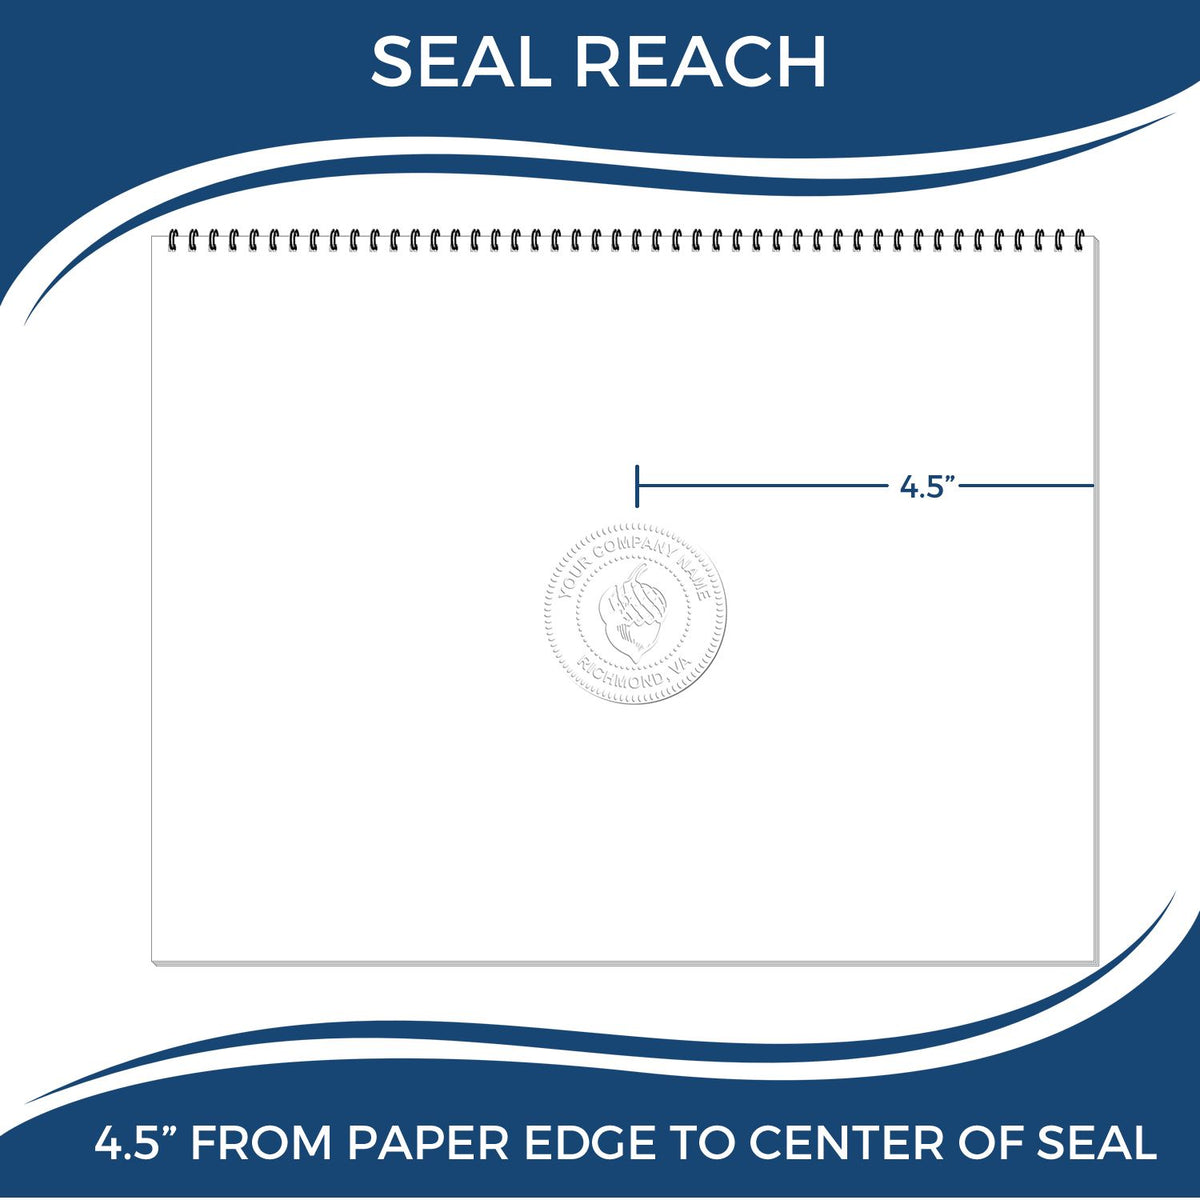 An infographic showing the seal reach which is represented by a ruler and a miniature seal image of the State of Wyoming Extended Long Reach Engineer Seal